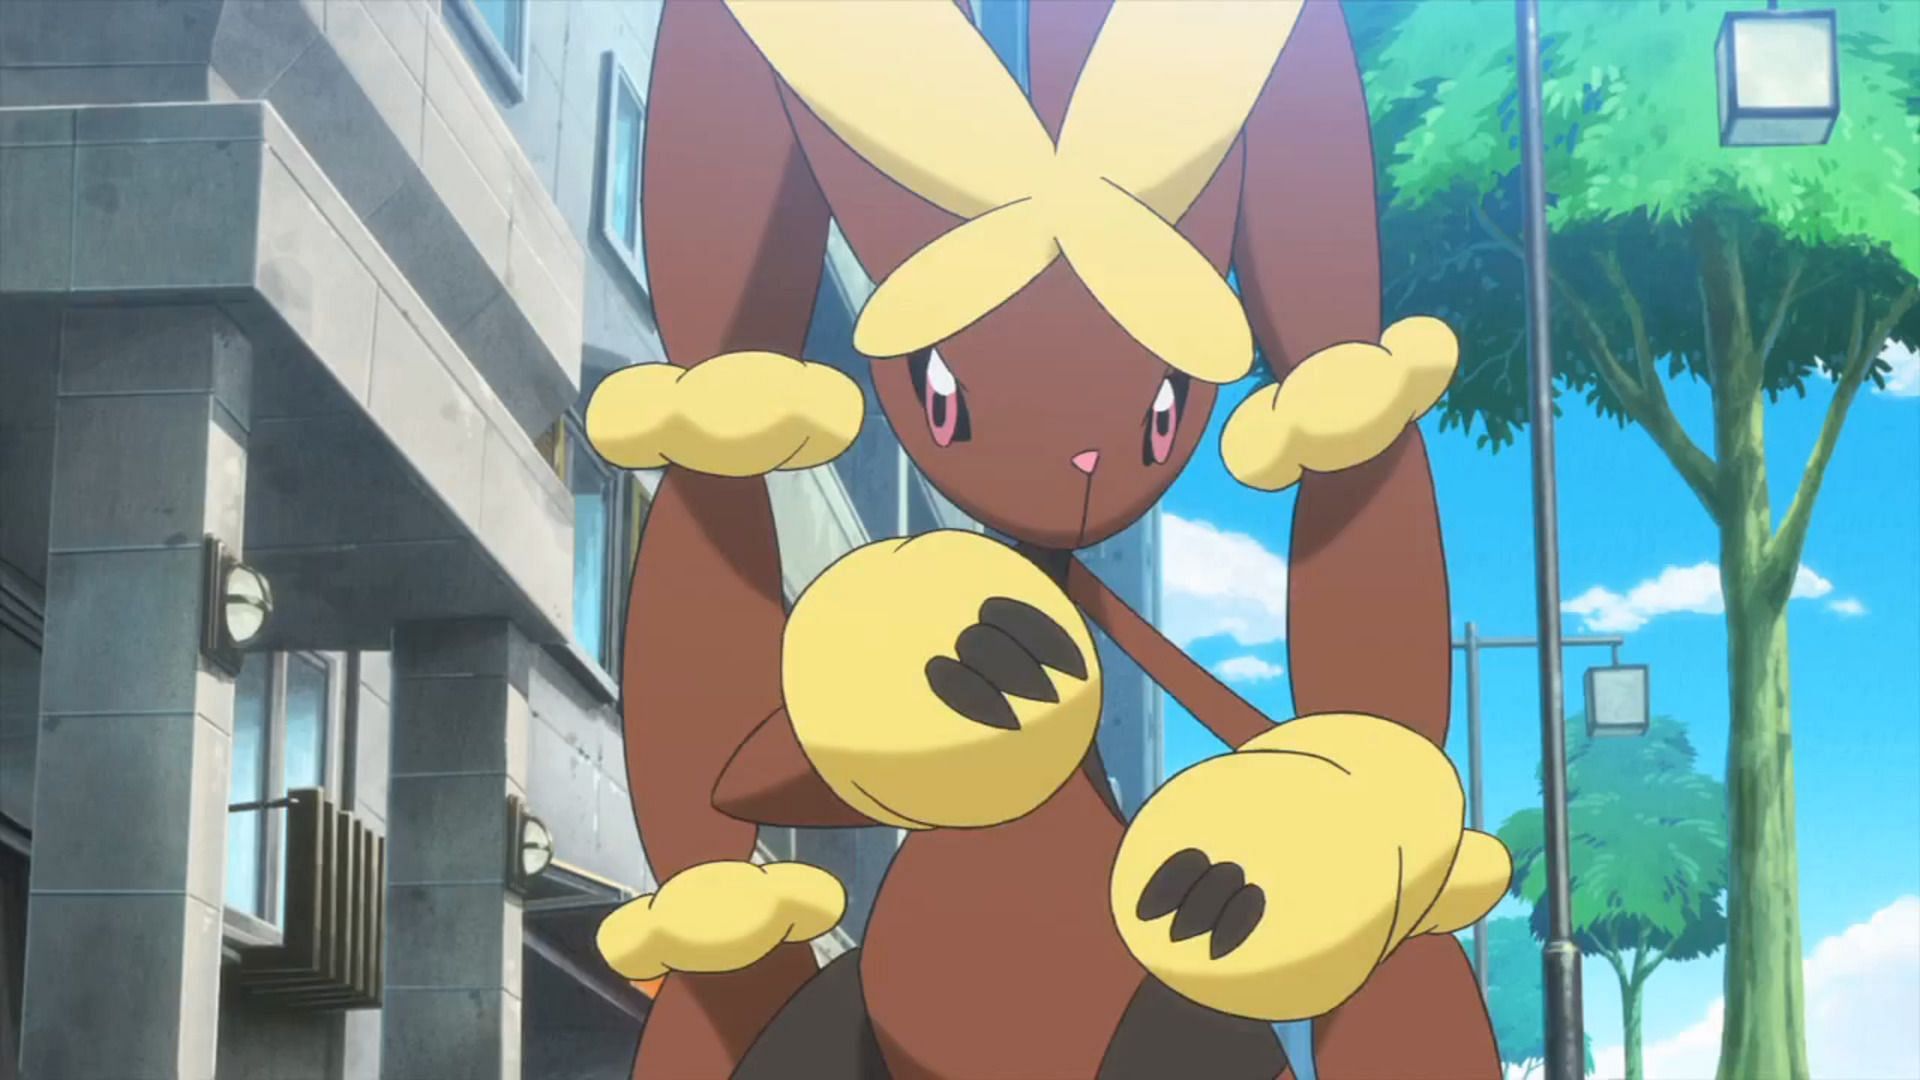 Mega Lopunny as it appears in the Pokemon Omega Ruby and Alpha Sapphire animated trailer (Image via The Pokemon Company)